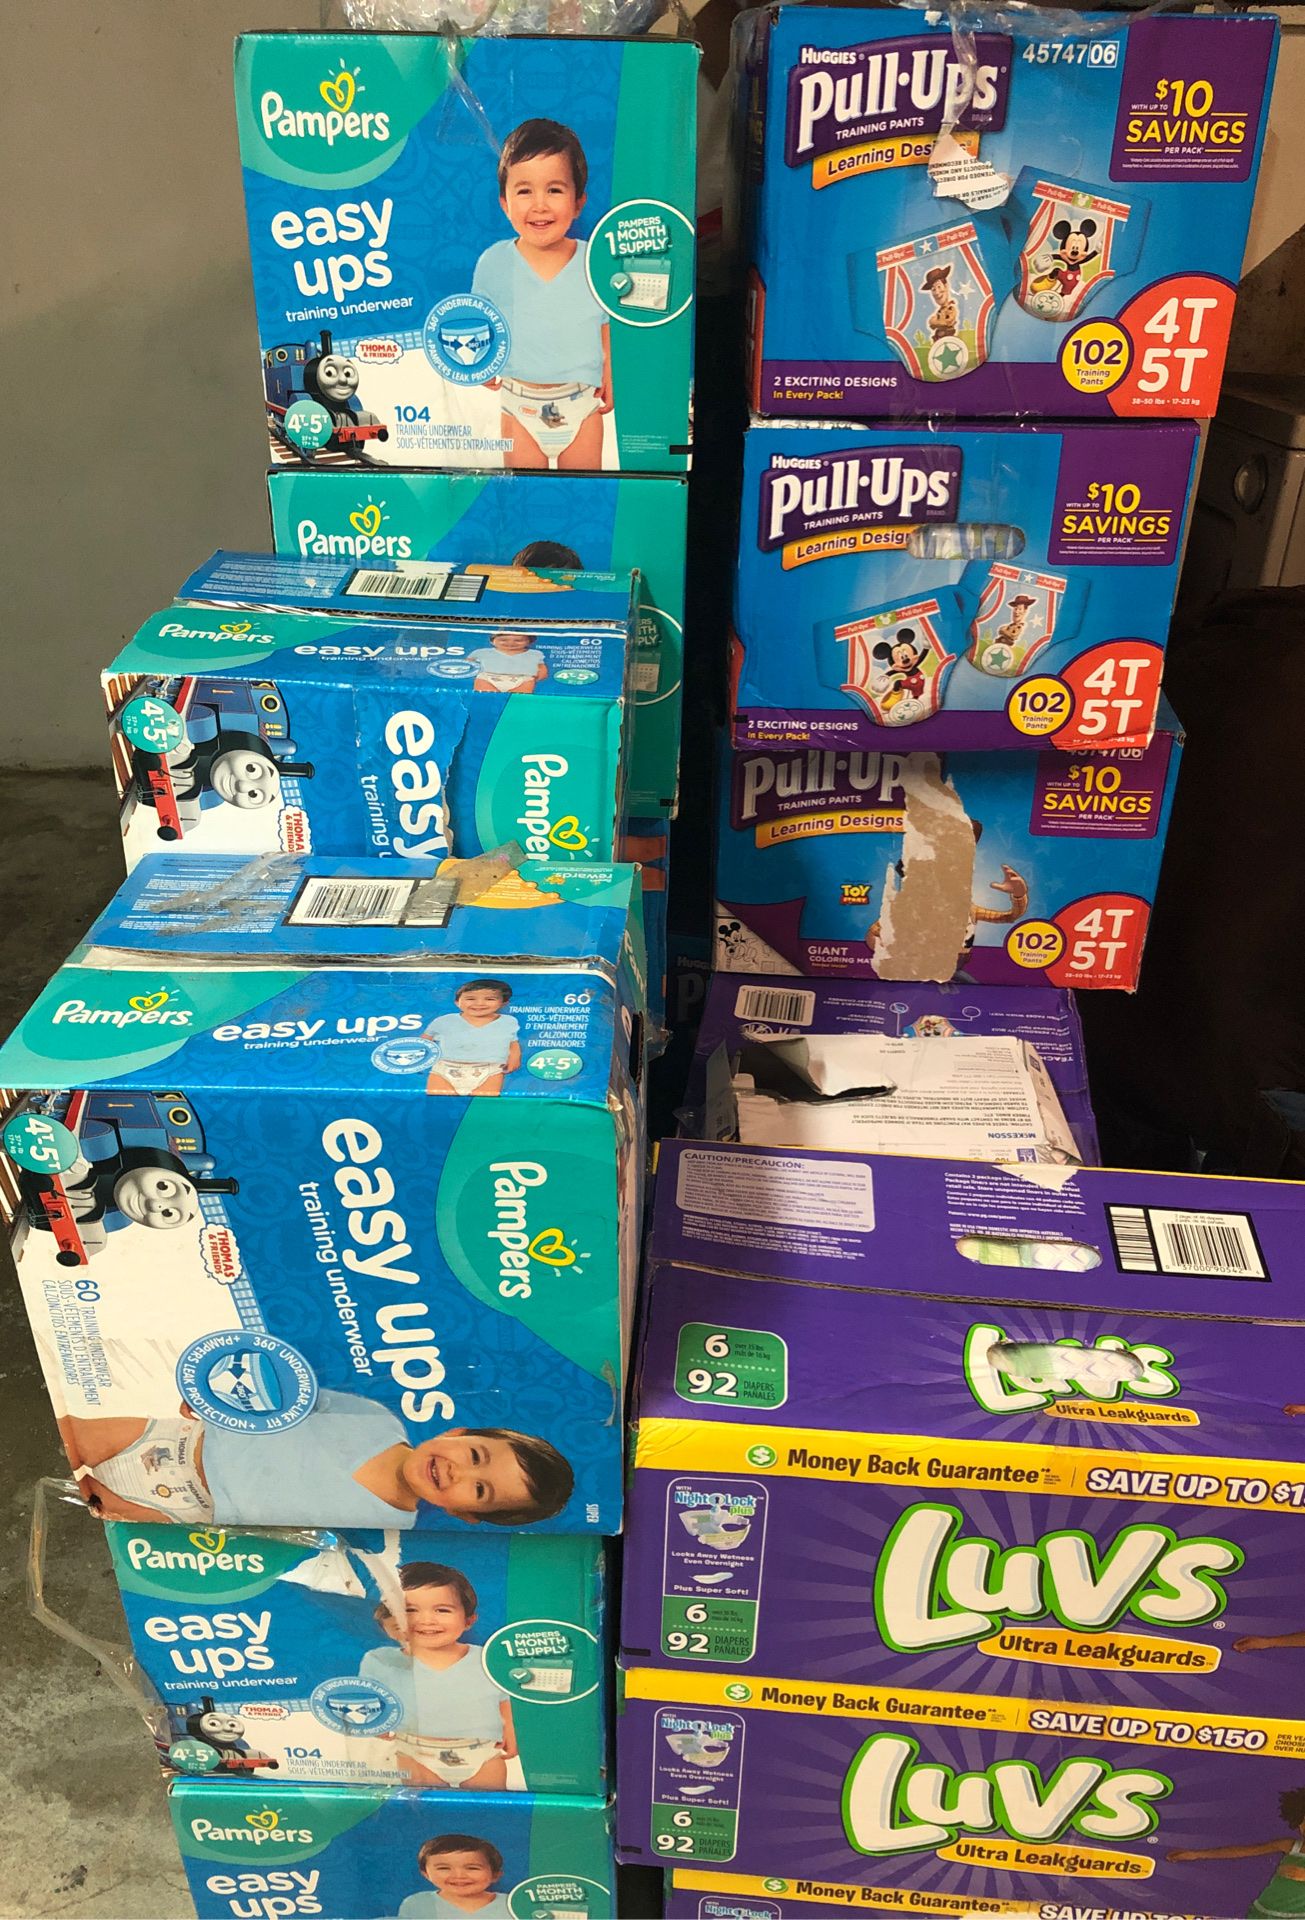 Pampers easy ups size 4t 5t 60 to 104 count easy ups size 4t 5t luvs diapers 92 count size 6 Attends pads and chucks for beds or pet needs